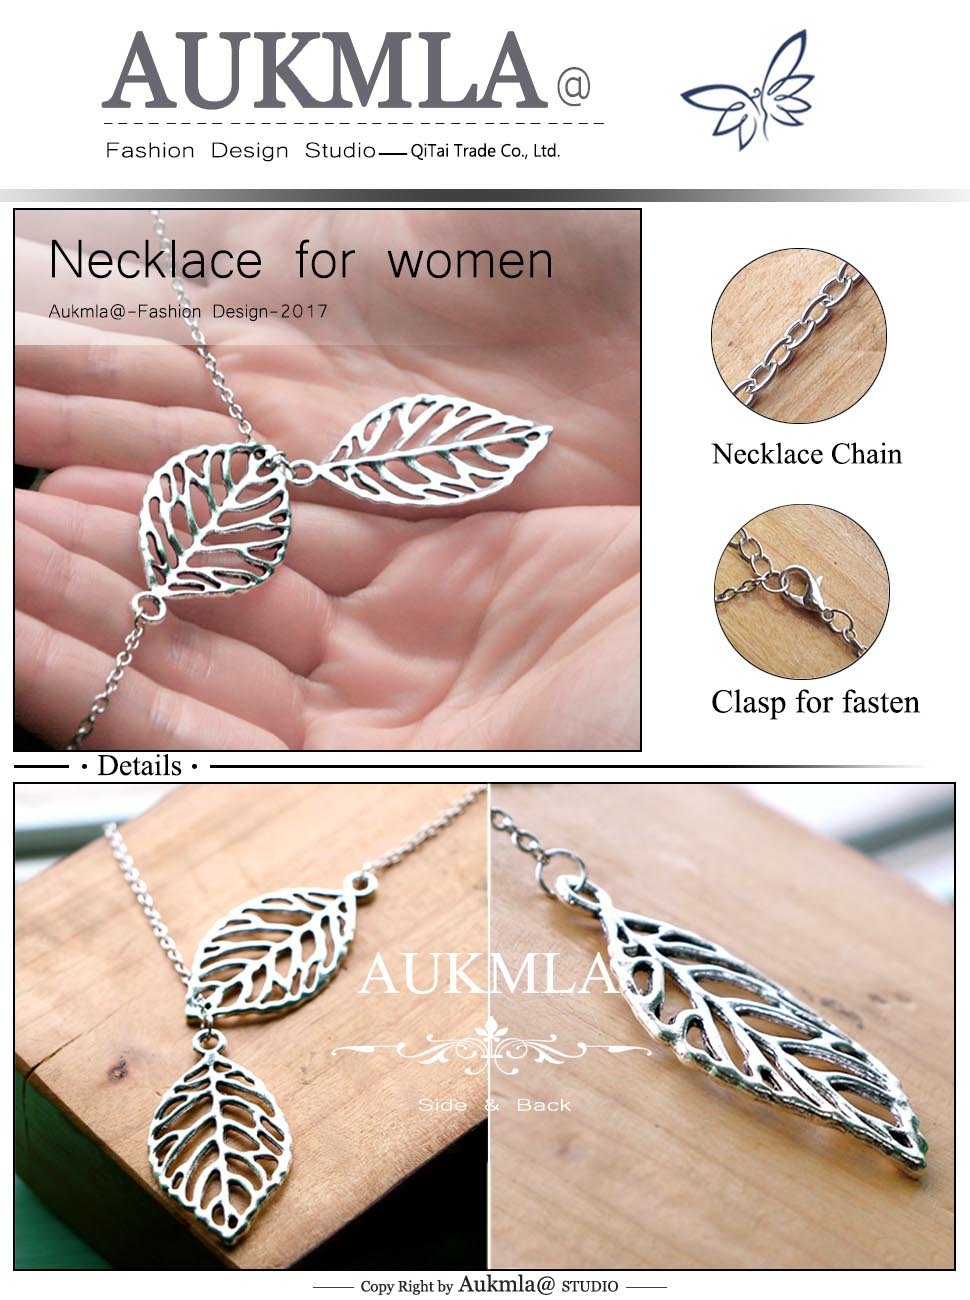 Aukmla Boho Lariat Necklace Silver Leaf Pendant Necklaces Chain Jewelry for women and Girls